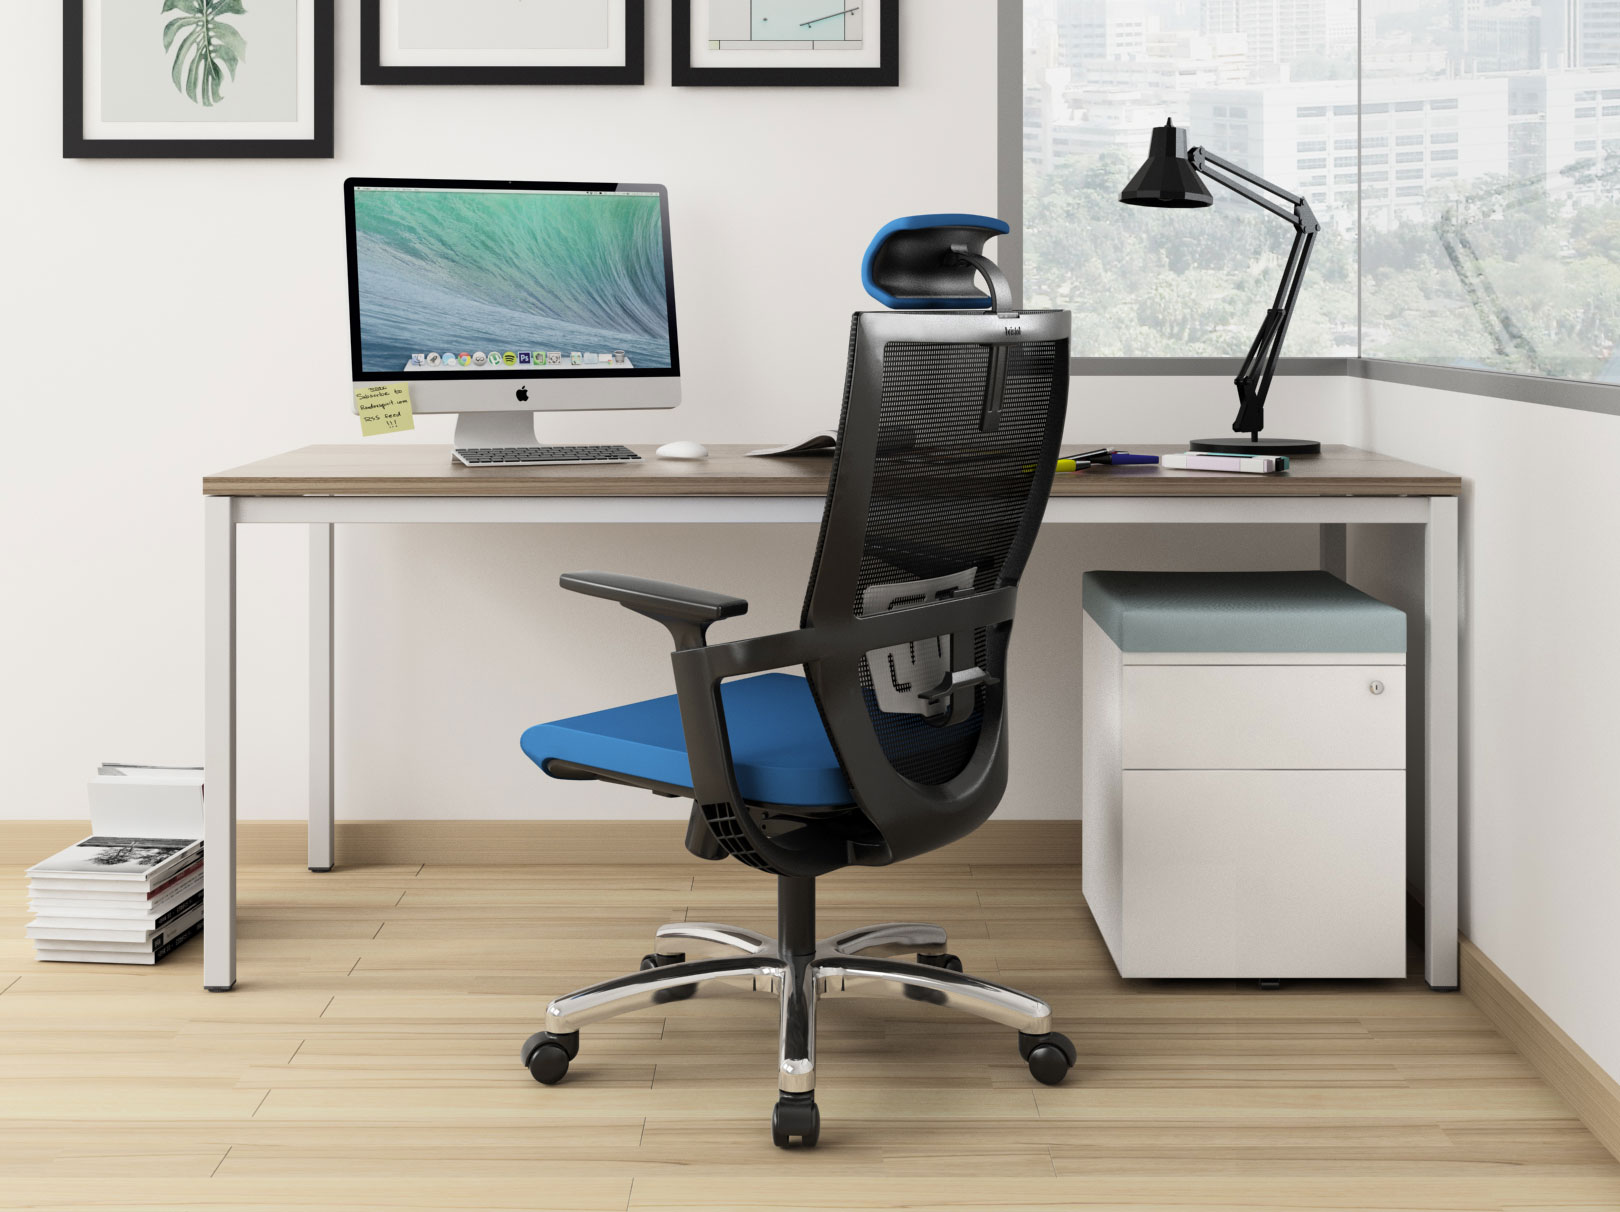 Kaya office chair in chrome crown base with Needs table in a home office